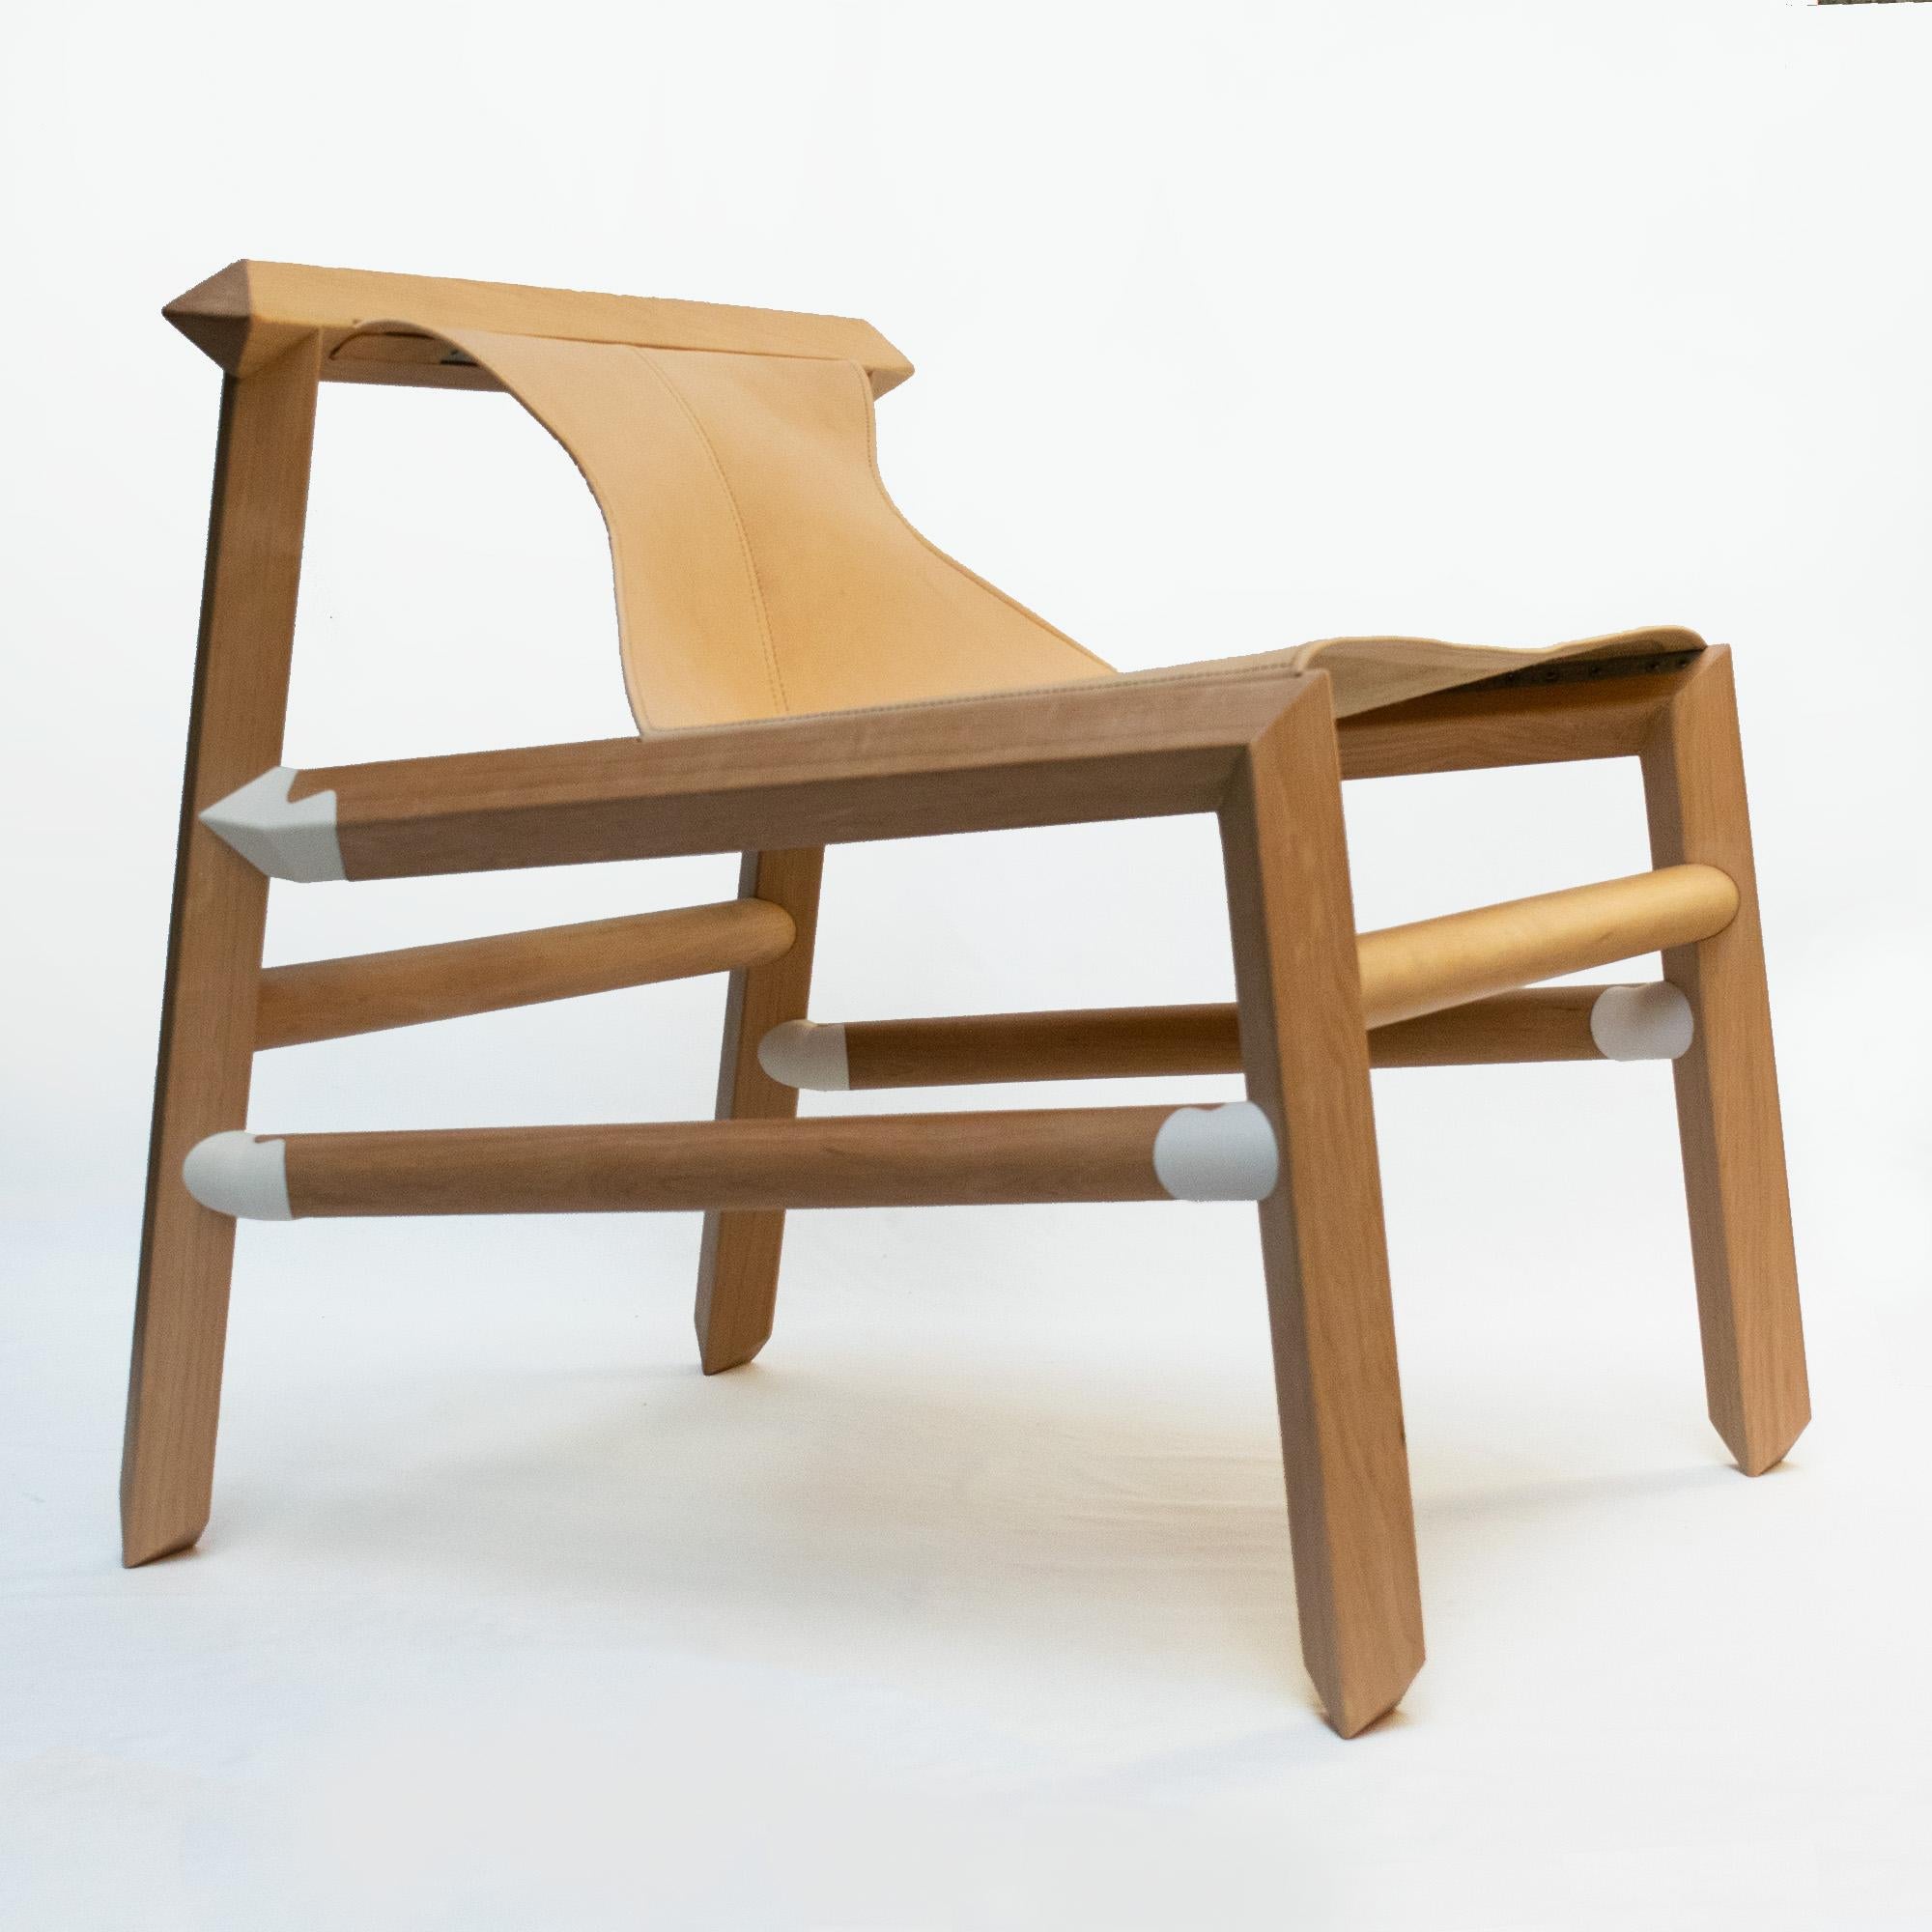 The Lounge chair 1907 was launched at the ICFF - Wanted design fair in 2019, during the New York design week. Each one of those barstools are made by his creator § team at the espina corona workshop under SLOW MADE standards and with ecological